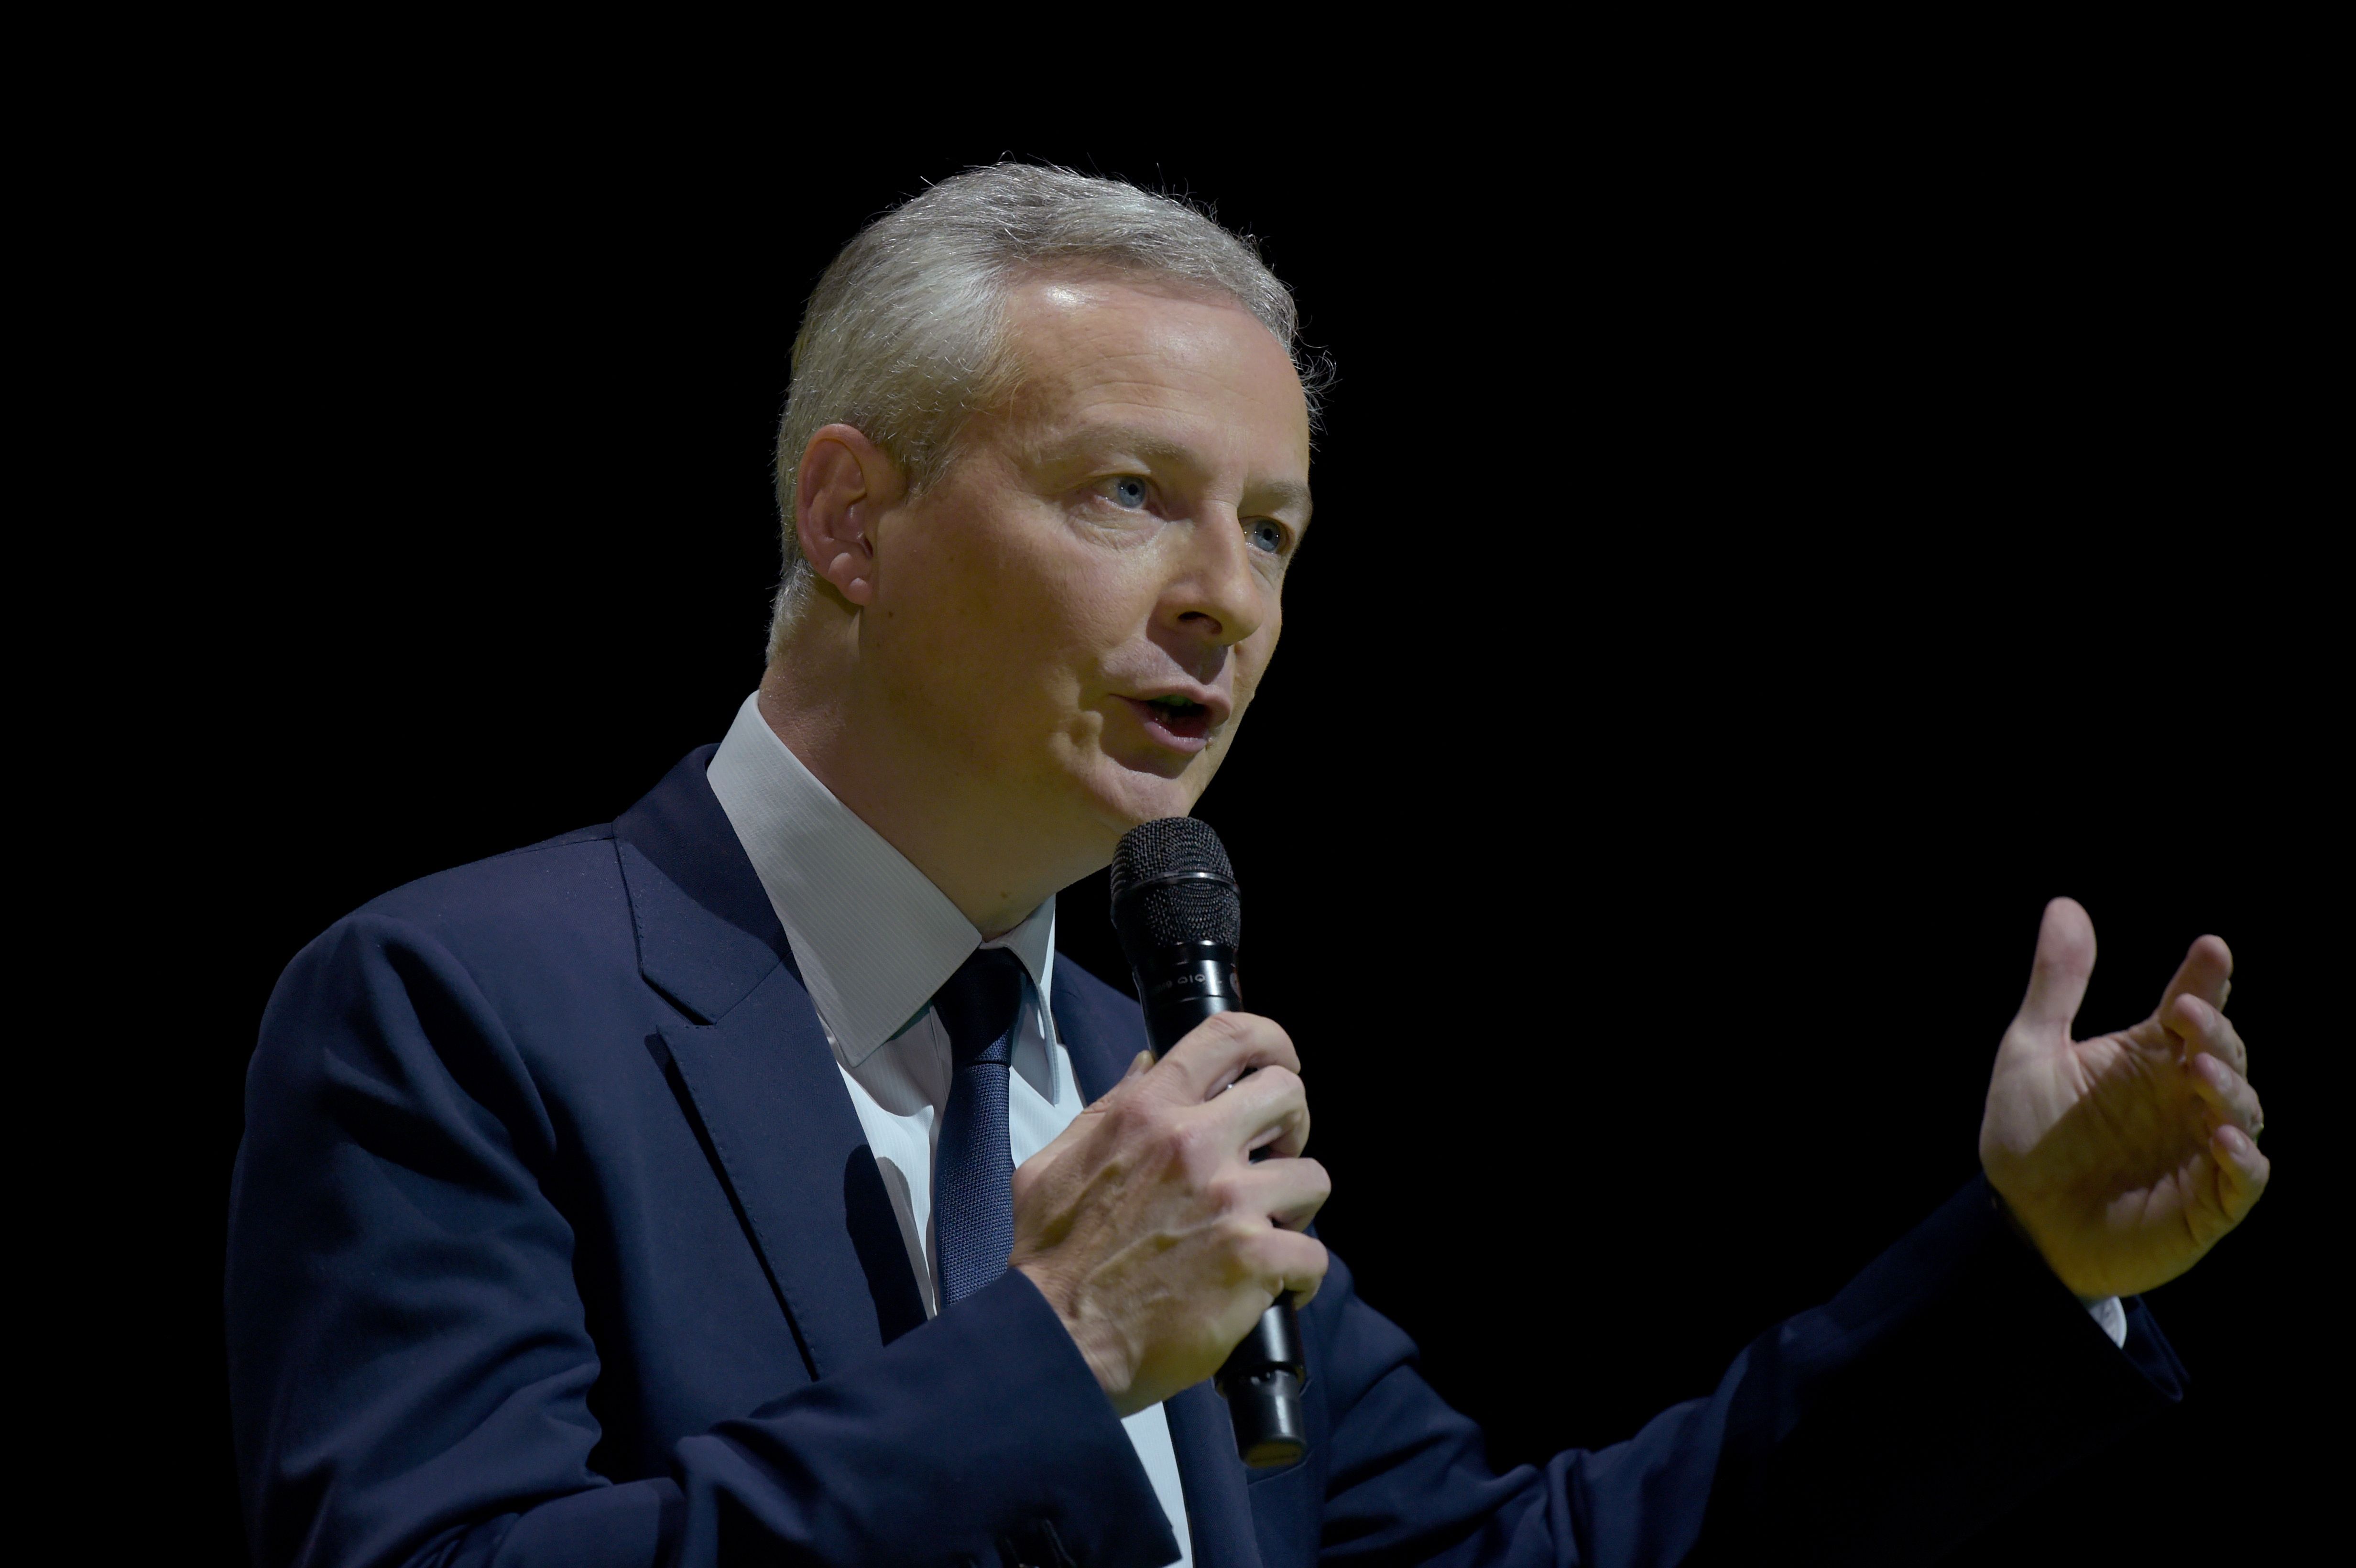 French Economy and Finance Minister Bruno Le Maire speaks at the Bpifrance Inno Generation event in Paris on October 11.